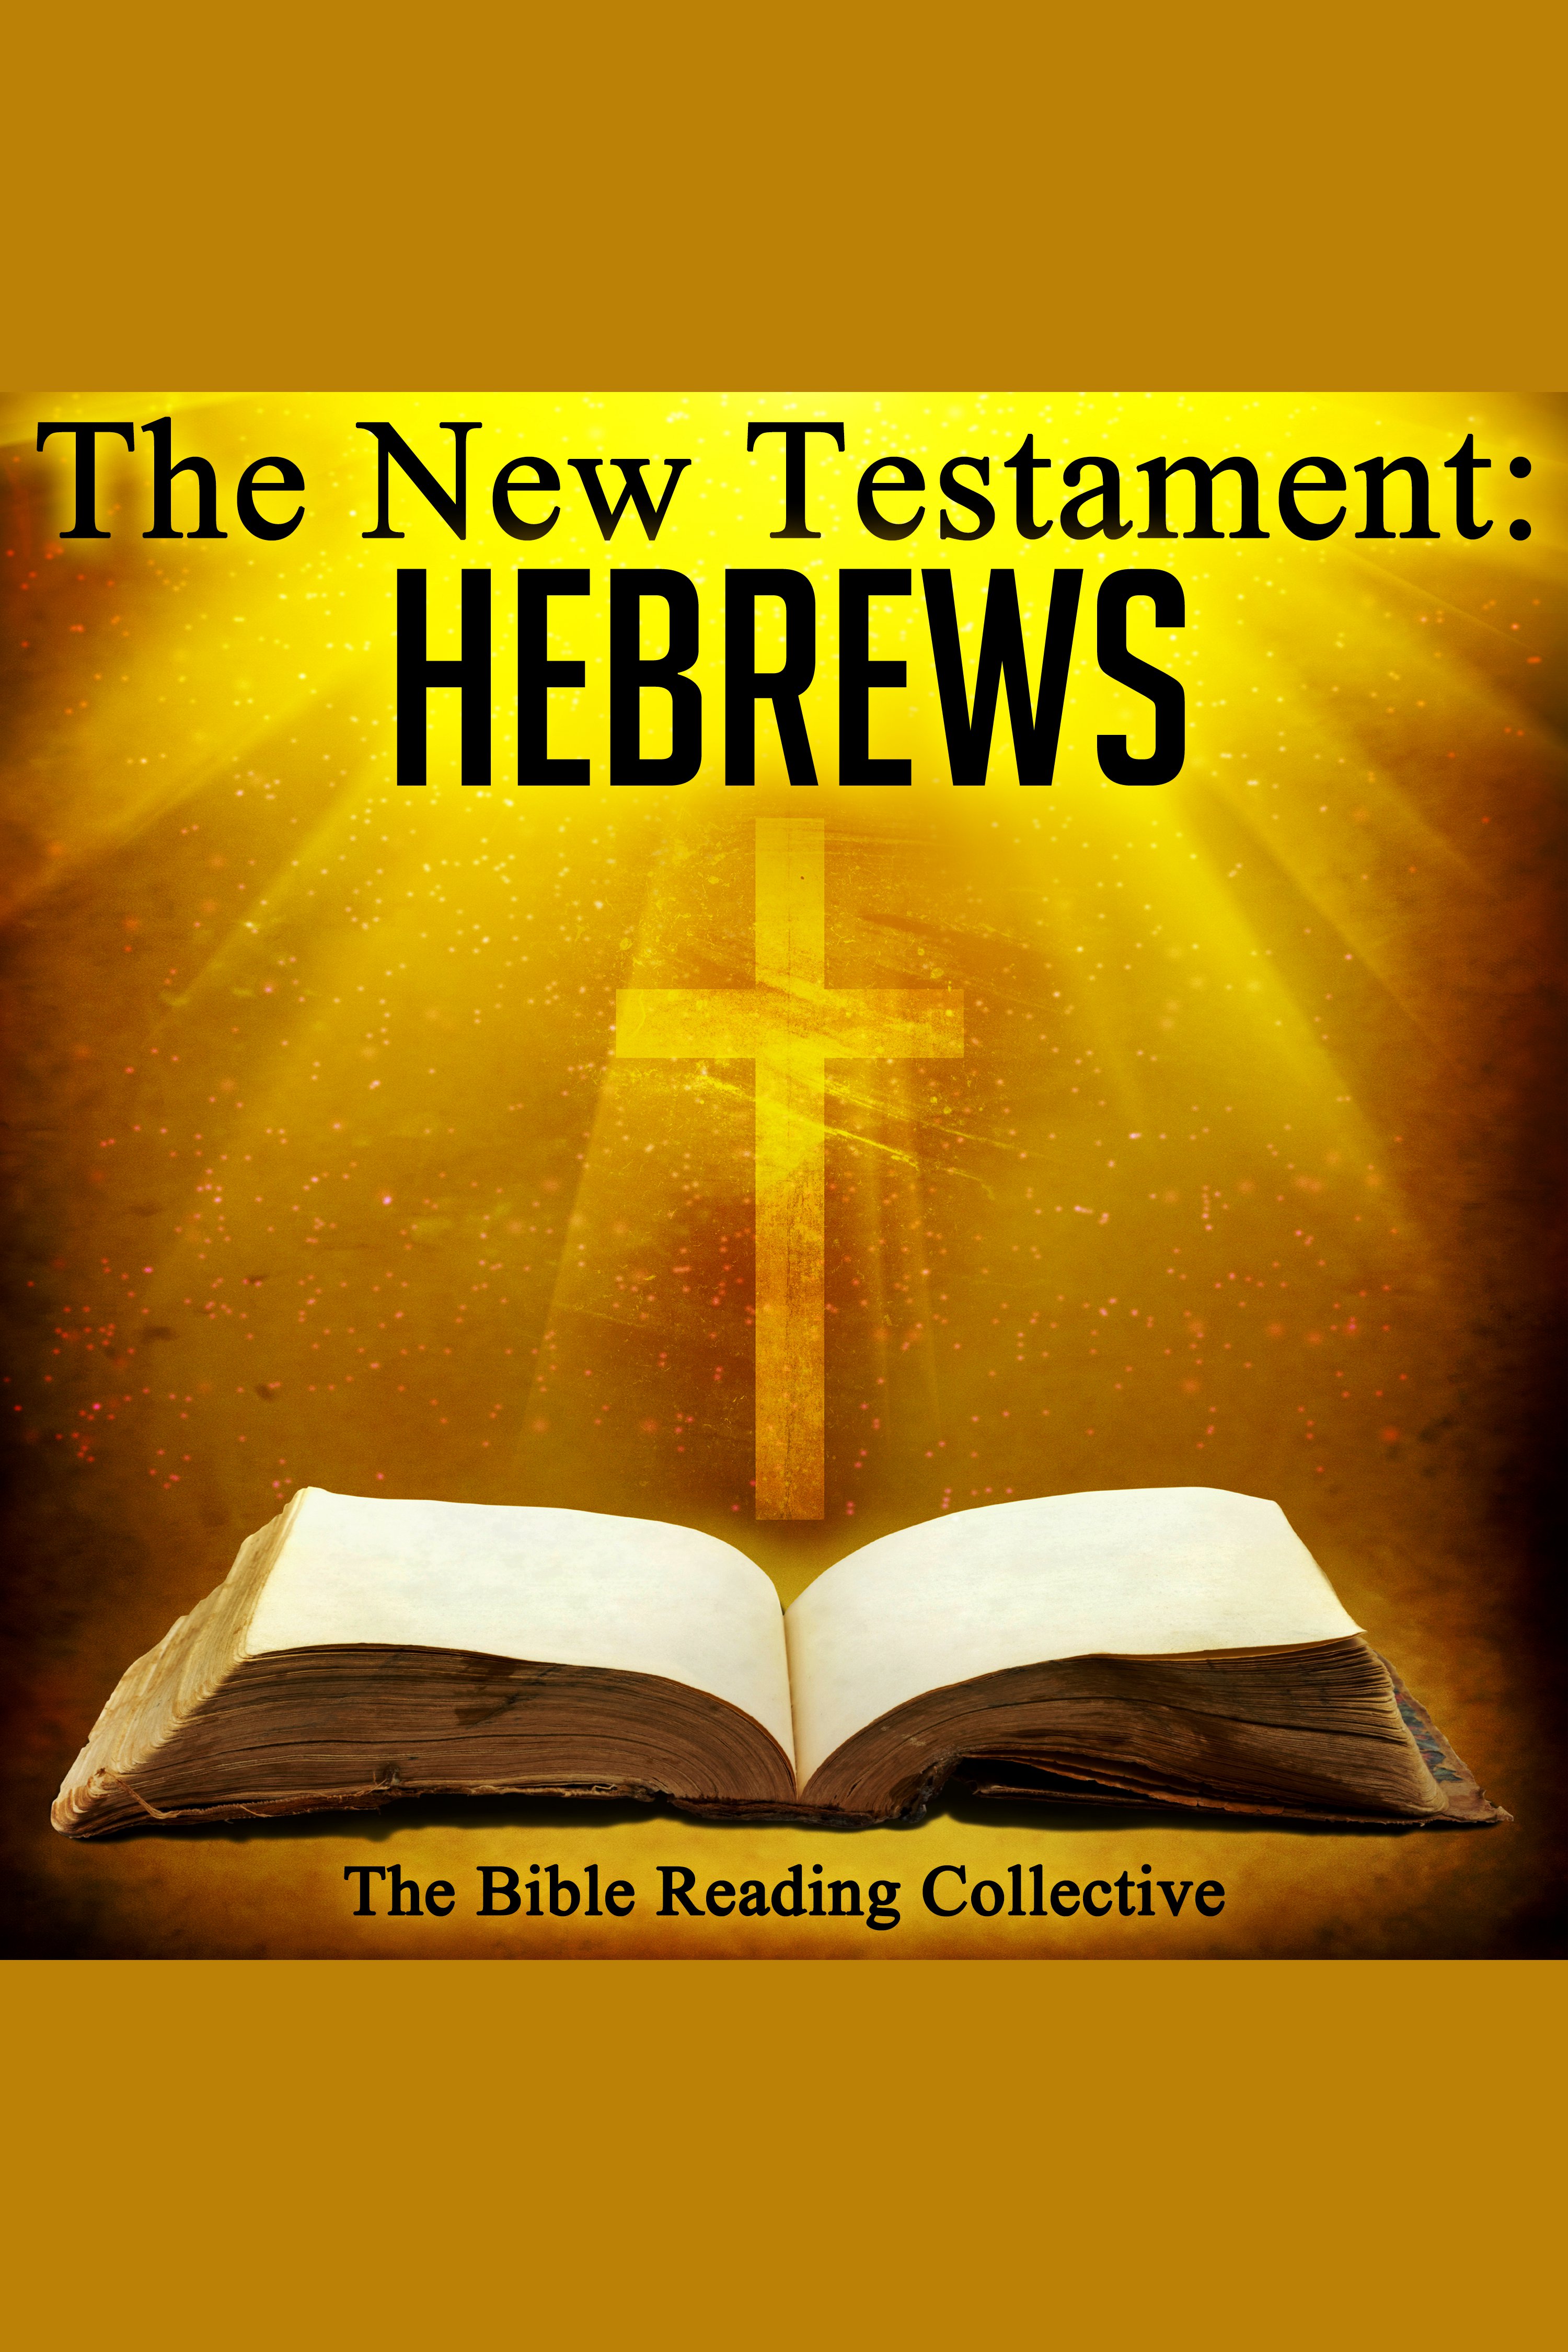 The New Testament: Hebrews cover image